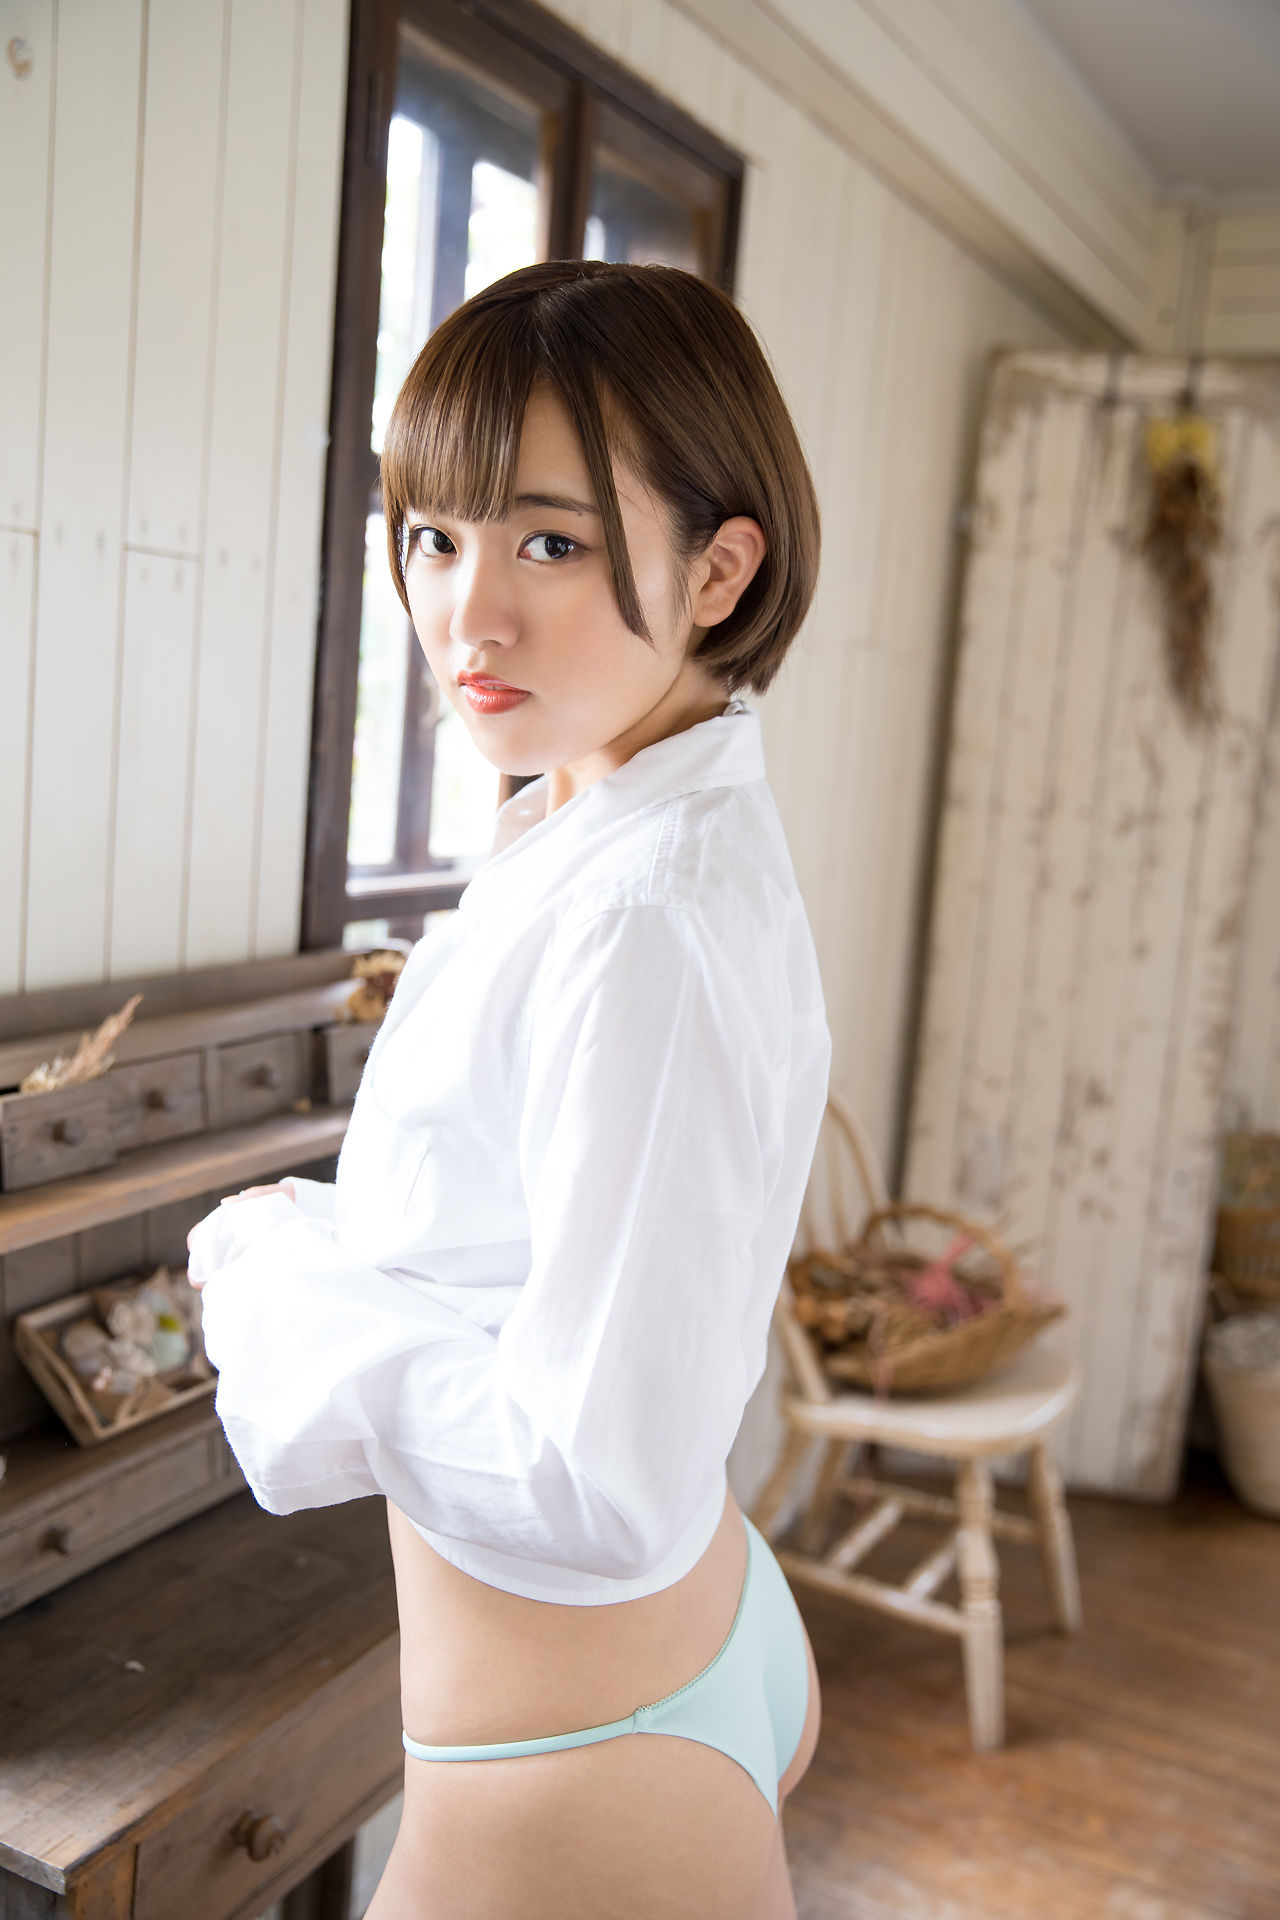 [Minisuka.tv] Xiang Yue お – Special Gallery 13.1